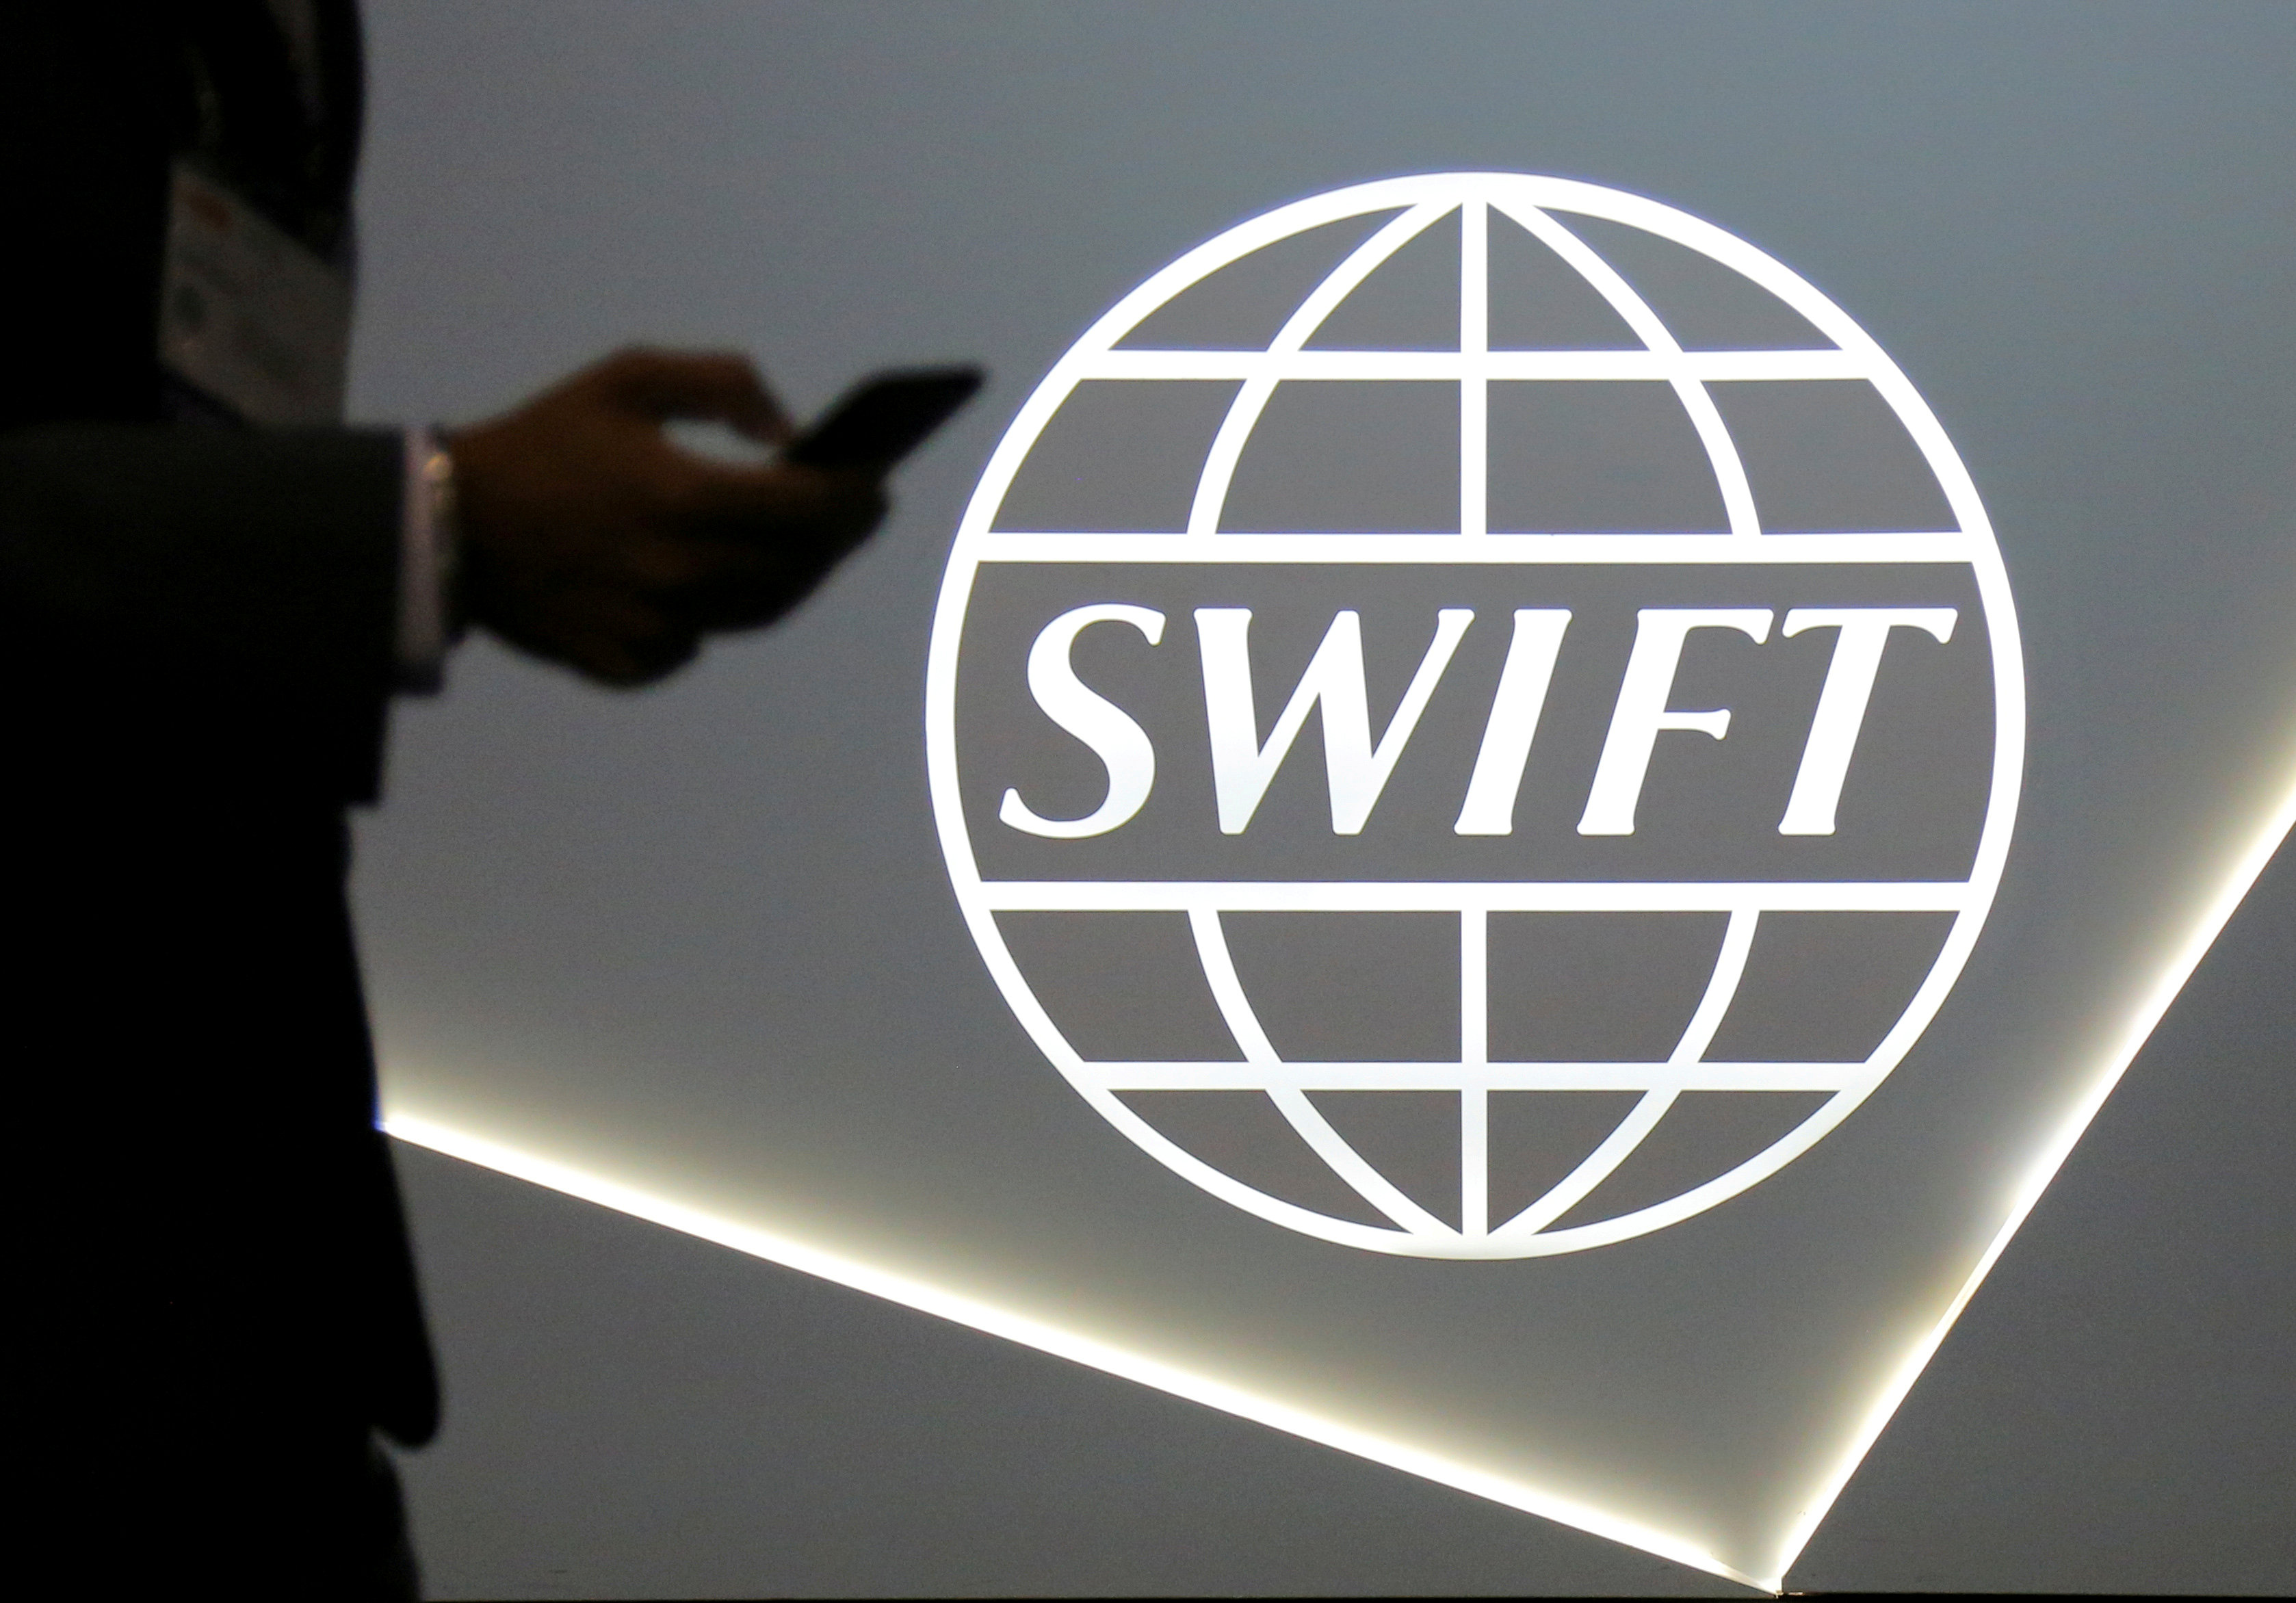 Hackers stole $6 million from Russian bank via SWIFT system